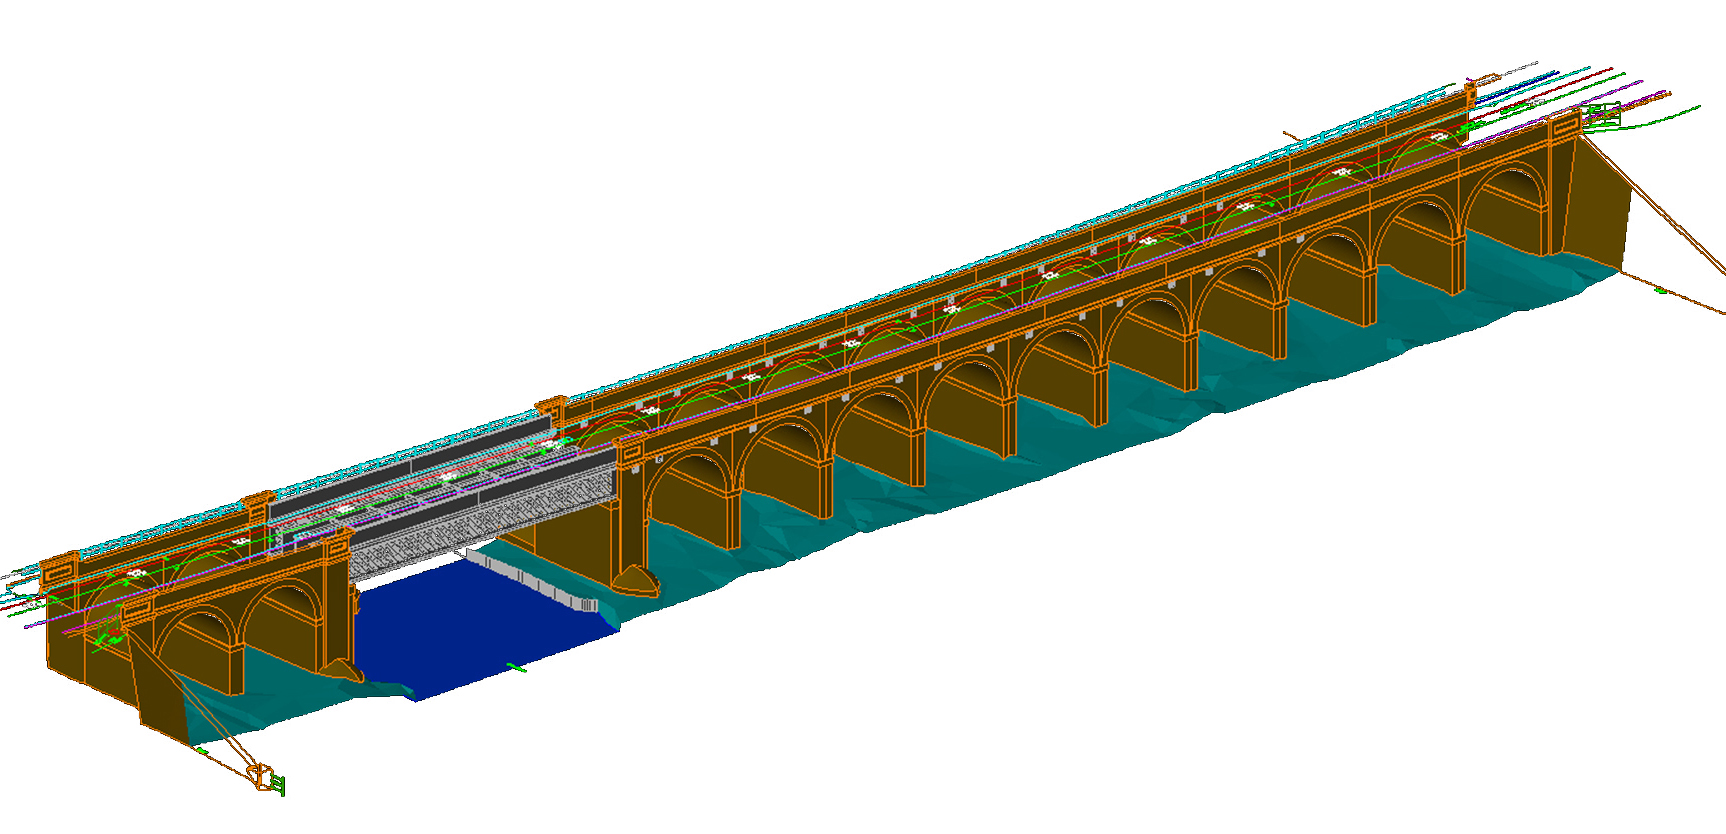 3D CAD Model of Irchester Viaduct